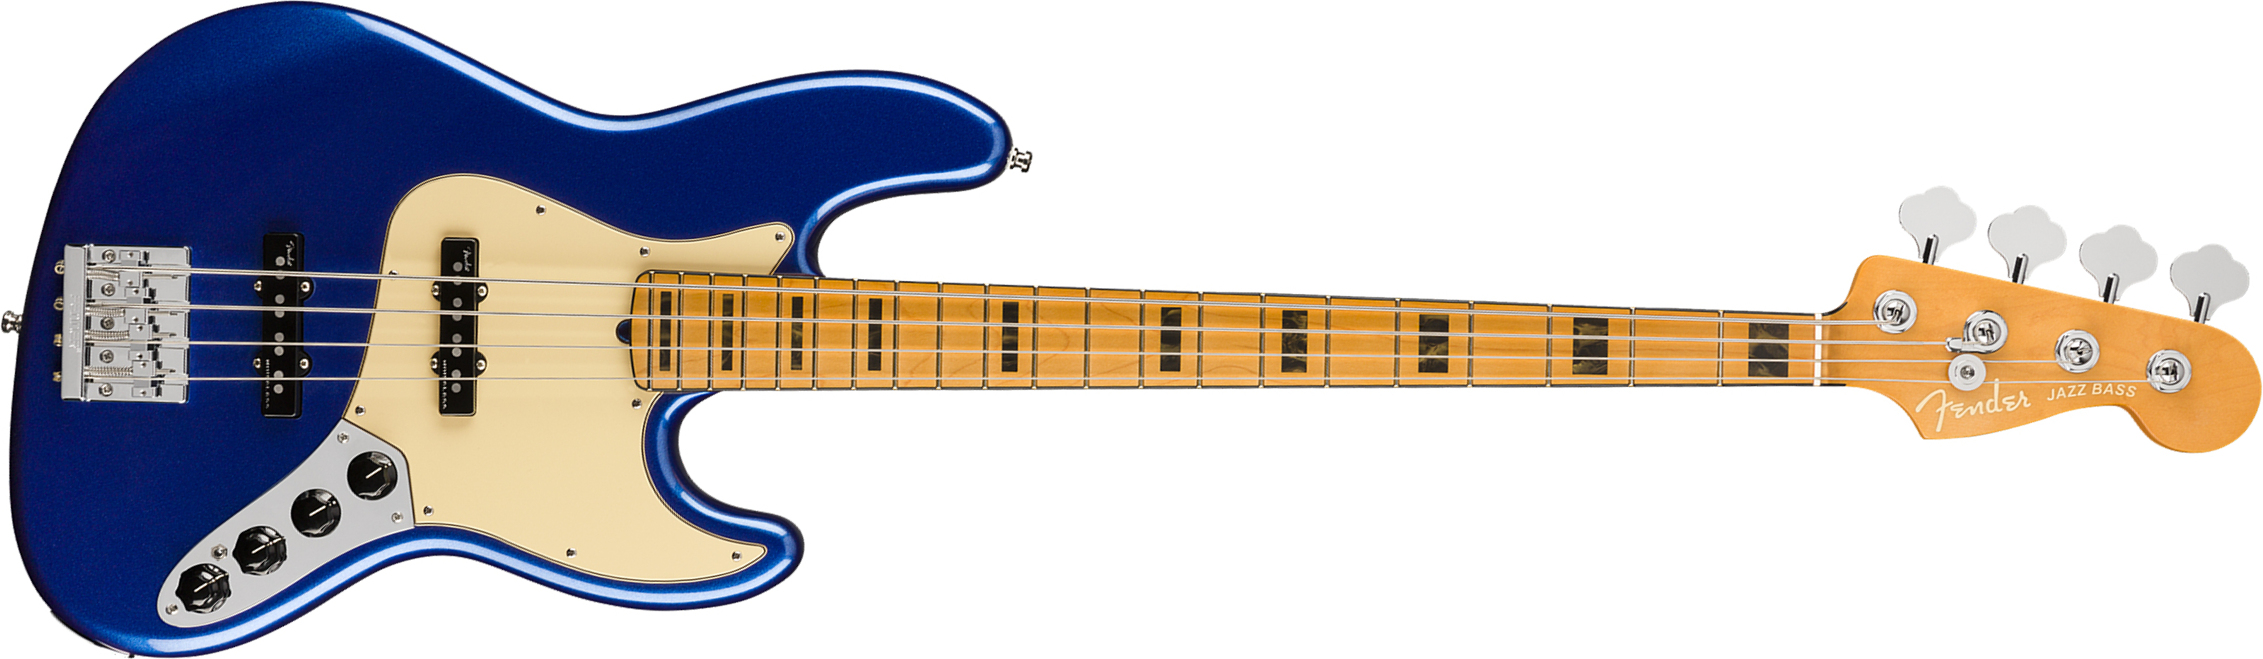 Fender Jazz Bass American Ultra 2019 Usa Mn - Cobra Blue - Solid body electric bass - Main picture